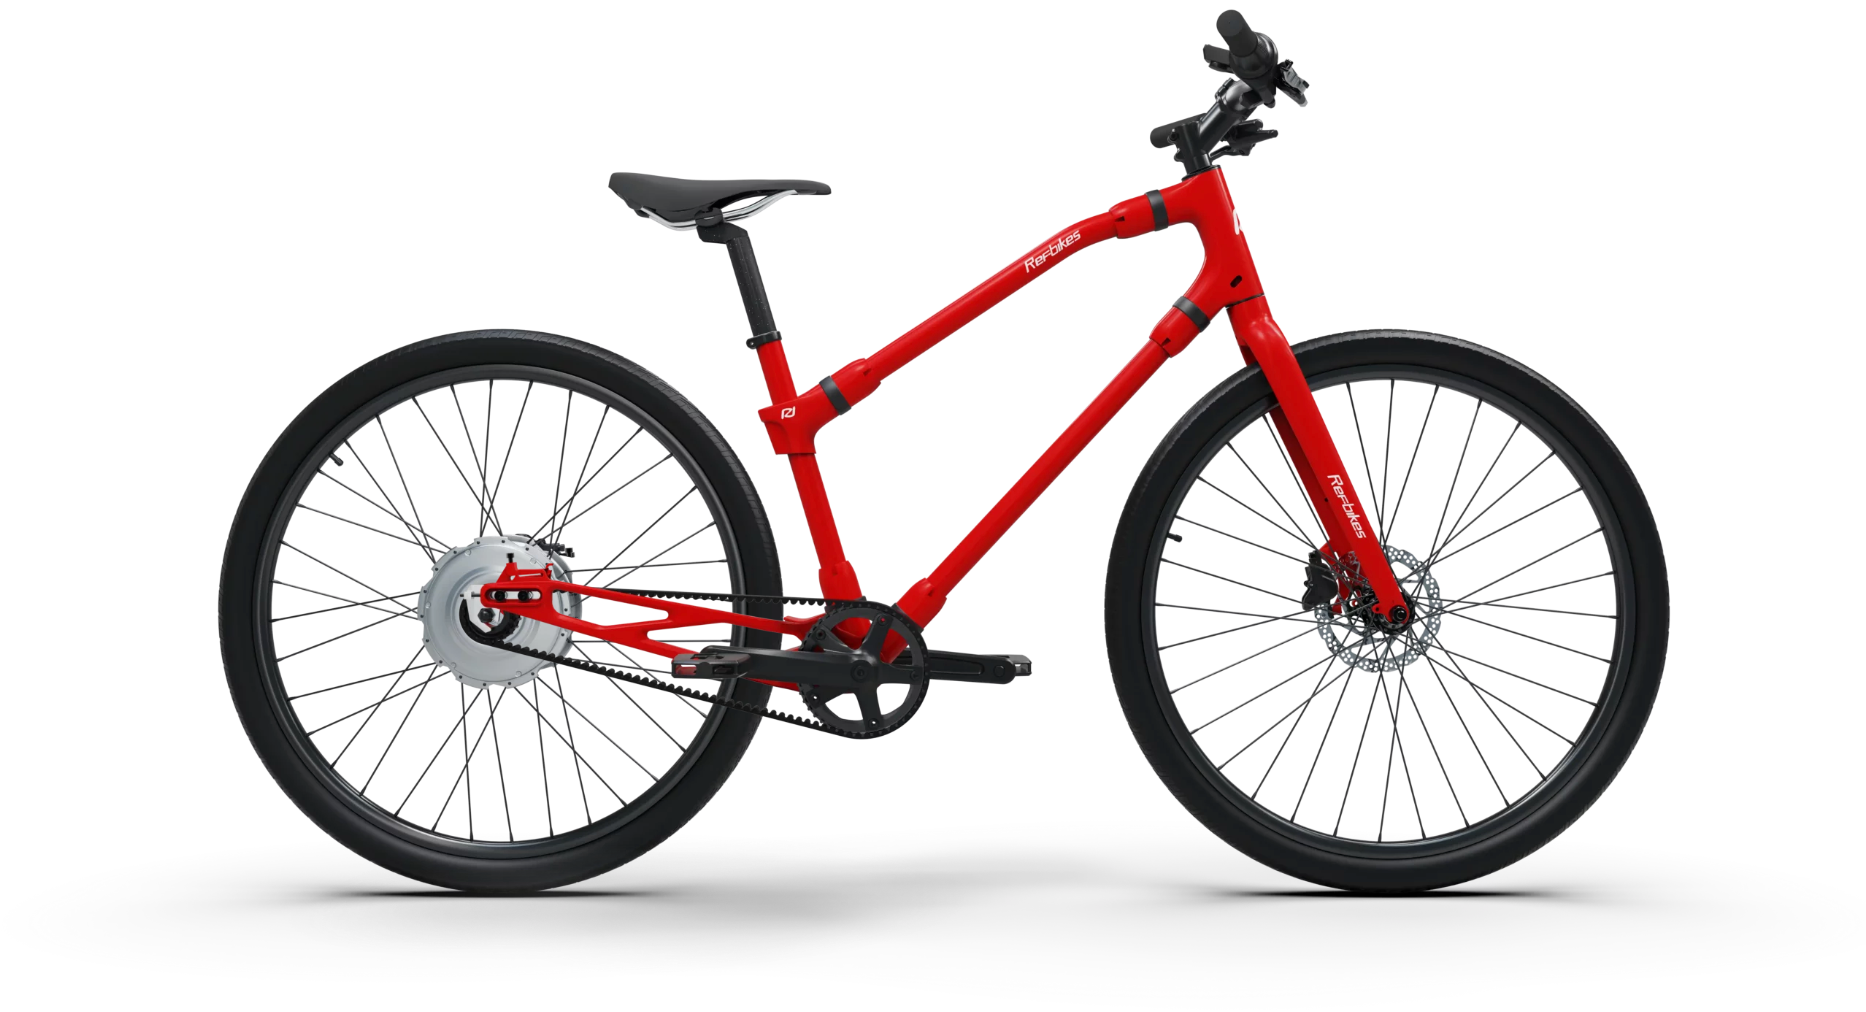 Bold red Essential Boost bike with a durable build and elegant design.